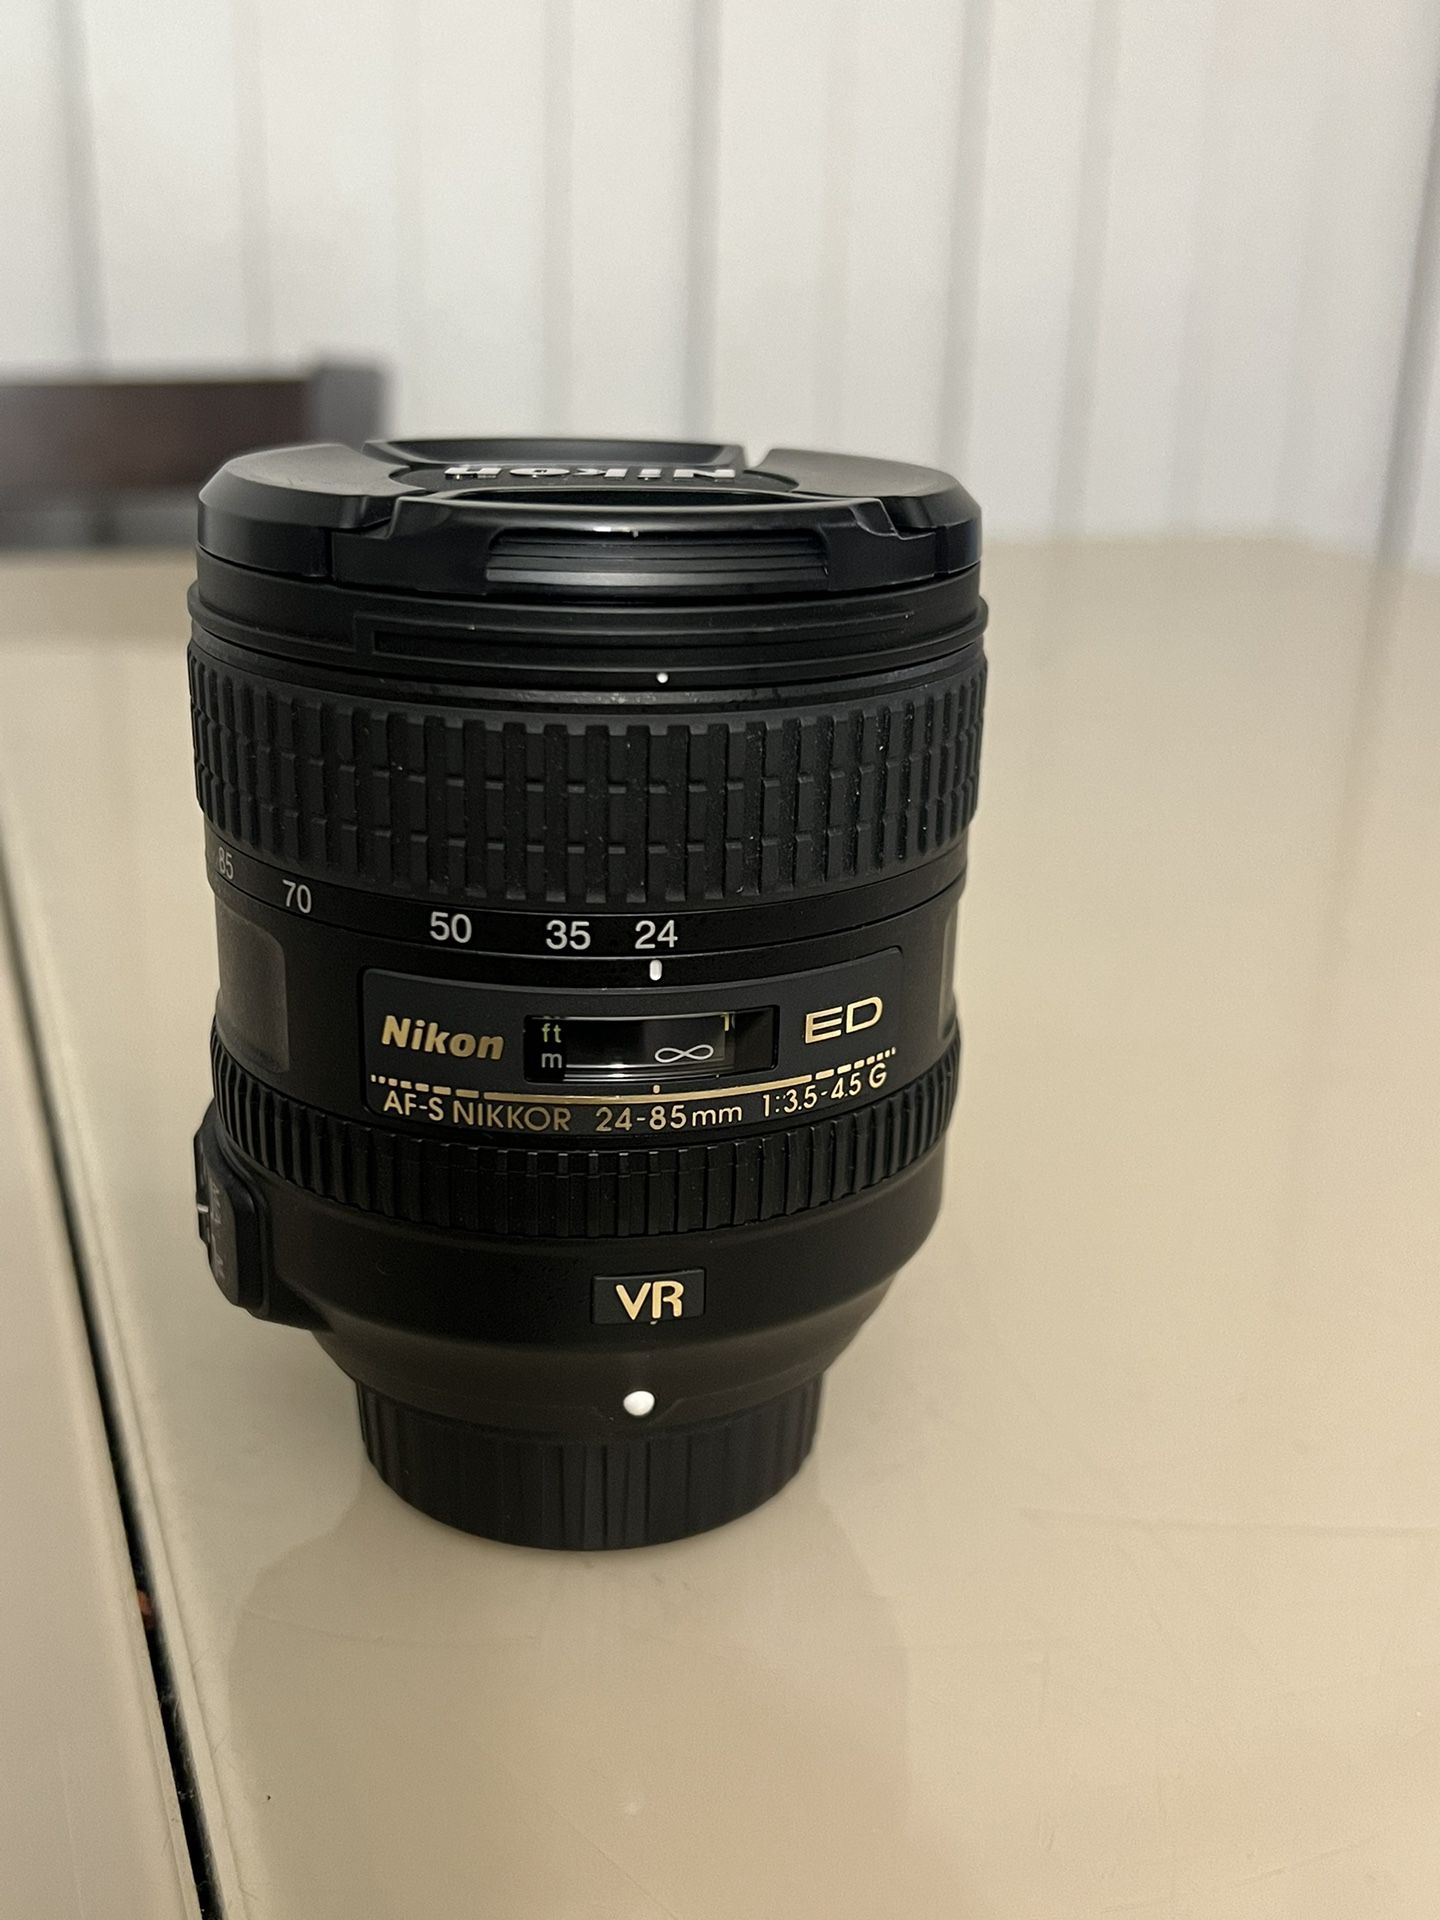 Nikon AF-S NIKKOR 24-85mm f 3.5-4.5G ED VR Zoom Lens Excellent Shape. From my personal collection this lens is very very gently and spearing used. Onl